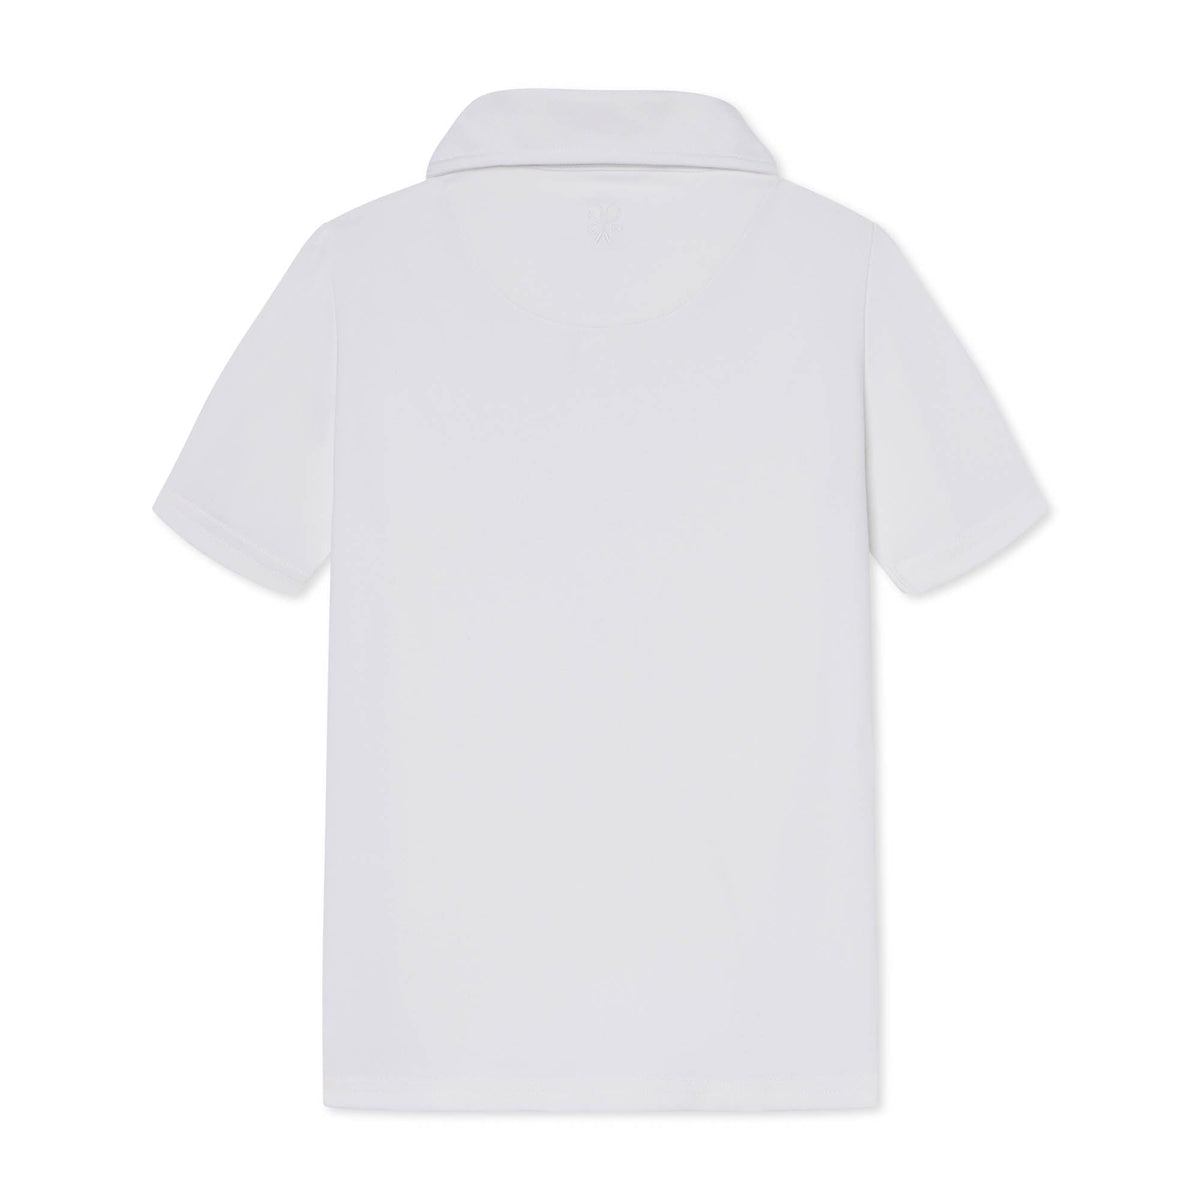 Classic and Preppy Terence Tennis Performance Chevron Polo, Bright White-Shirts and Tops-CPC - Classic Prep Childrenswear